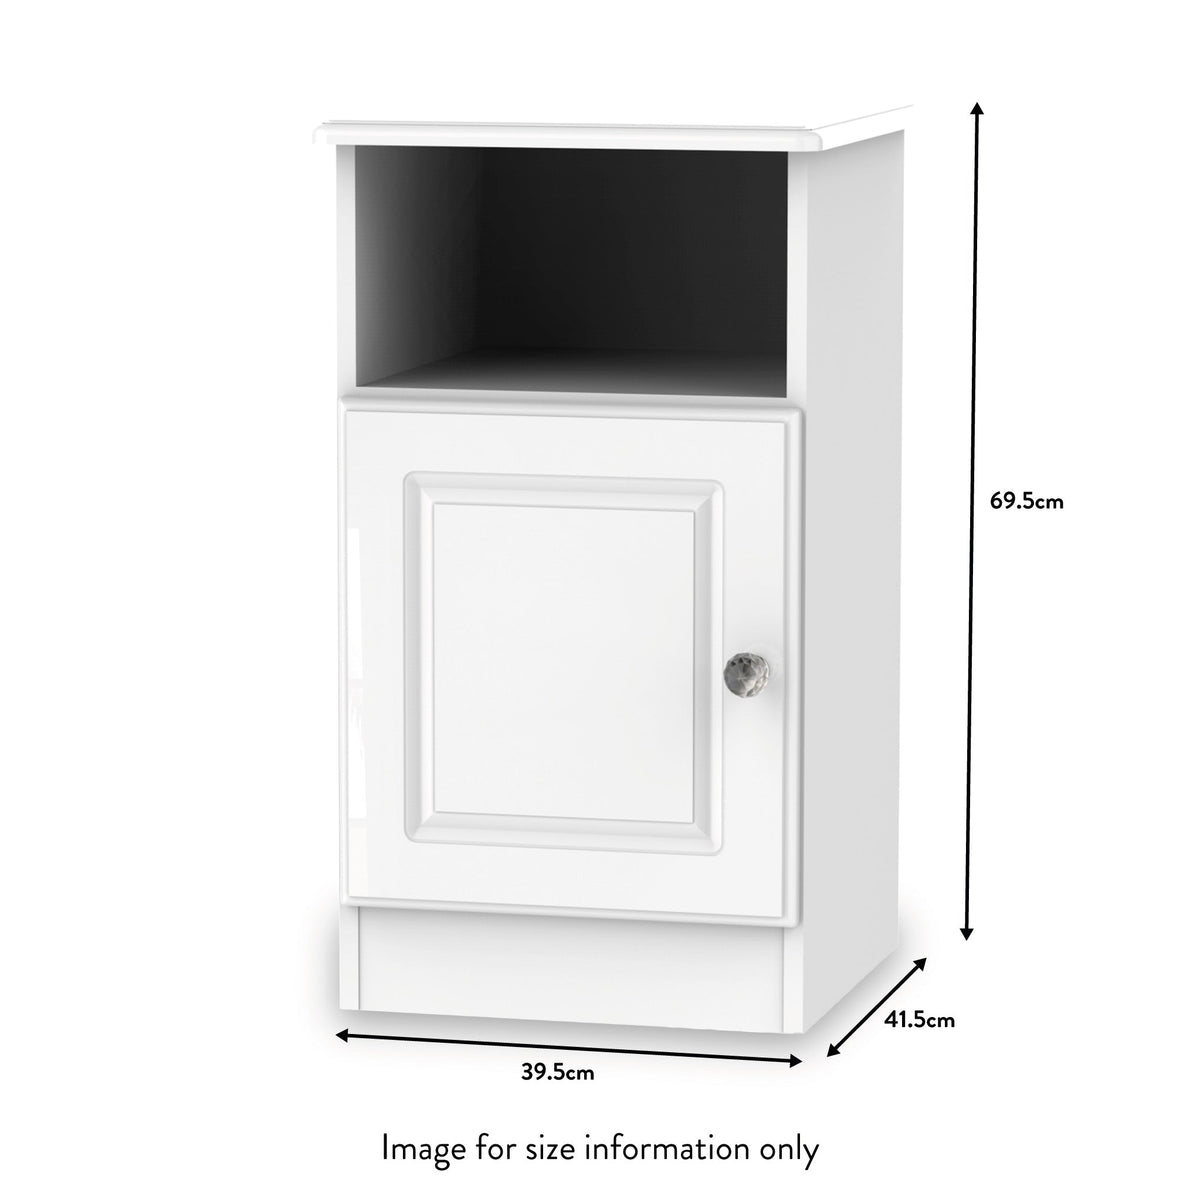 Kinsley White Gloss 1 Door with Open Shelf Cabinet from Roseland size